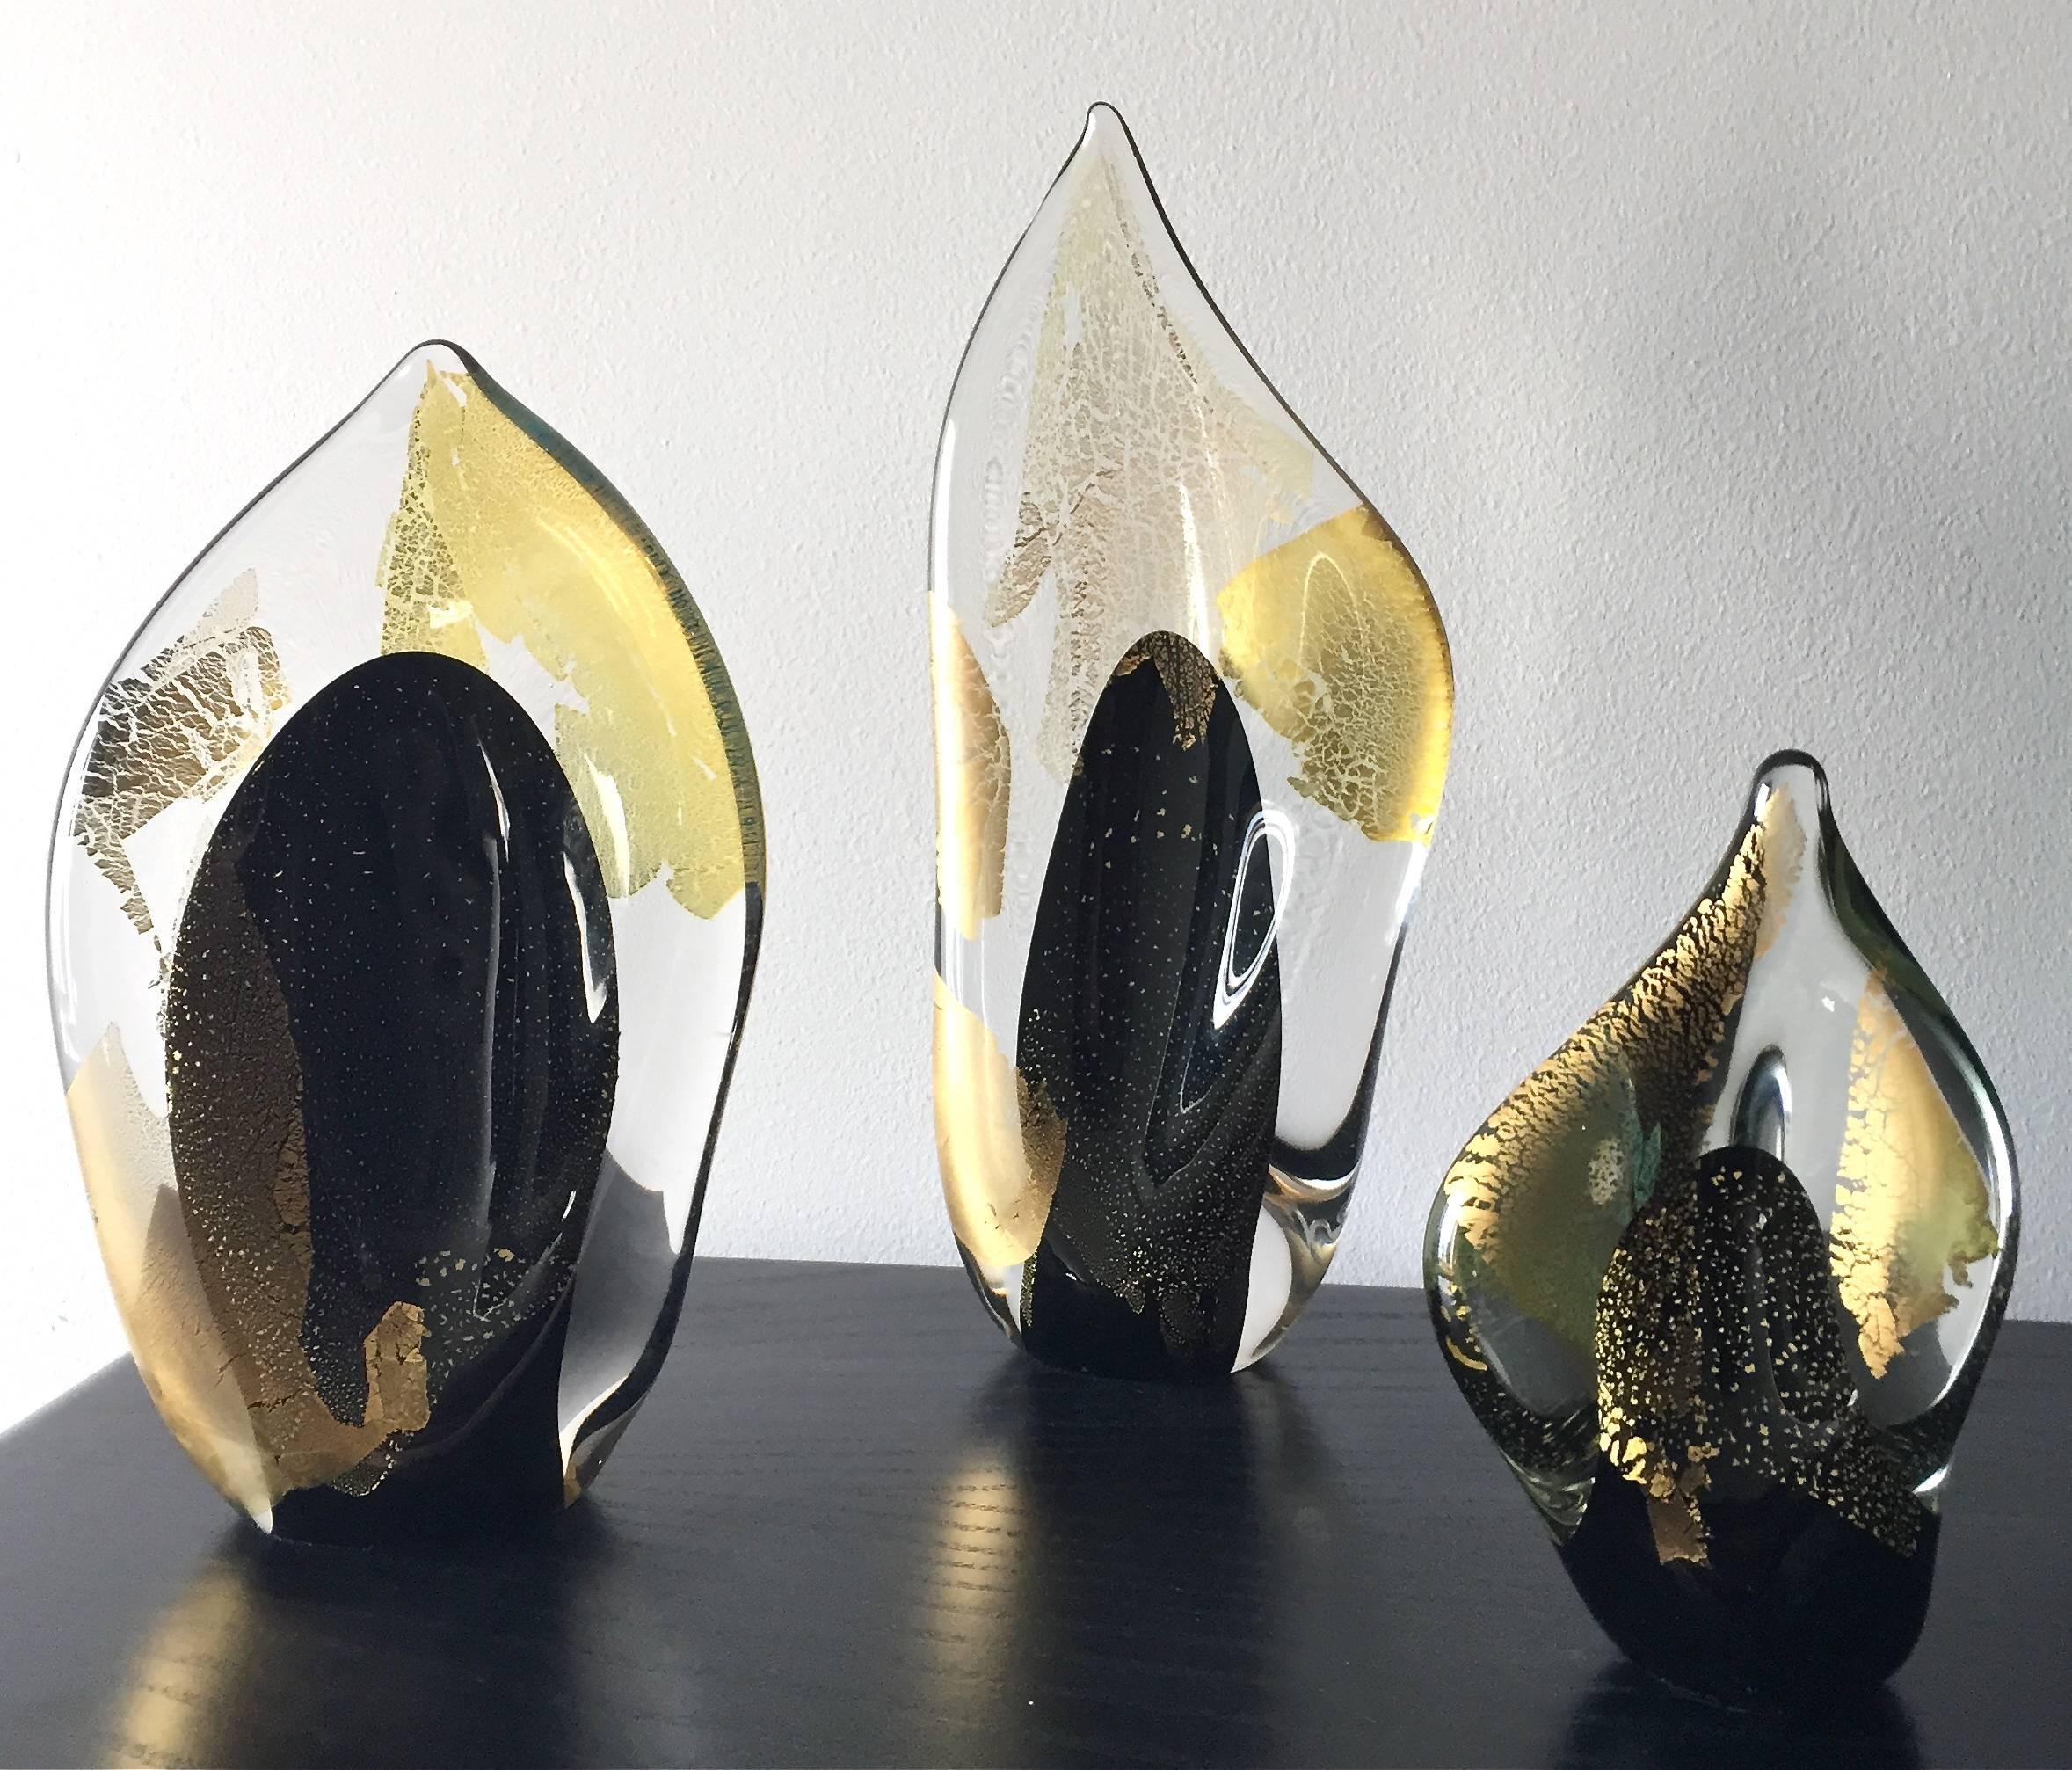 A set of three Randy Strong Dichroic flame art glass sculptures. All are signed R. Strong and dated 93. Measures: Sizes are 12.50 inches x 5.25 inches, 9.75 inches x 5.75 inches and 6.75 inches x 4 inches.